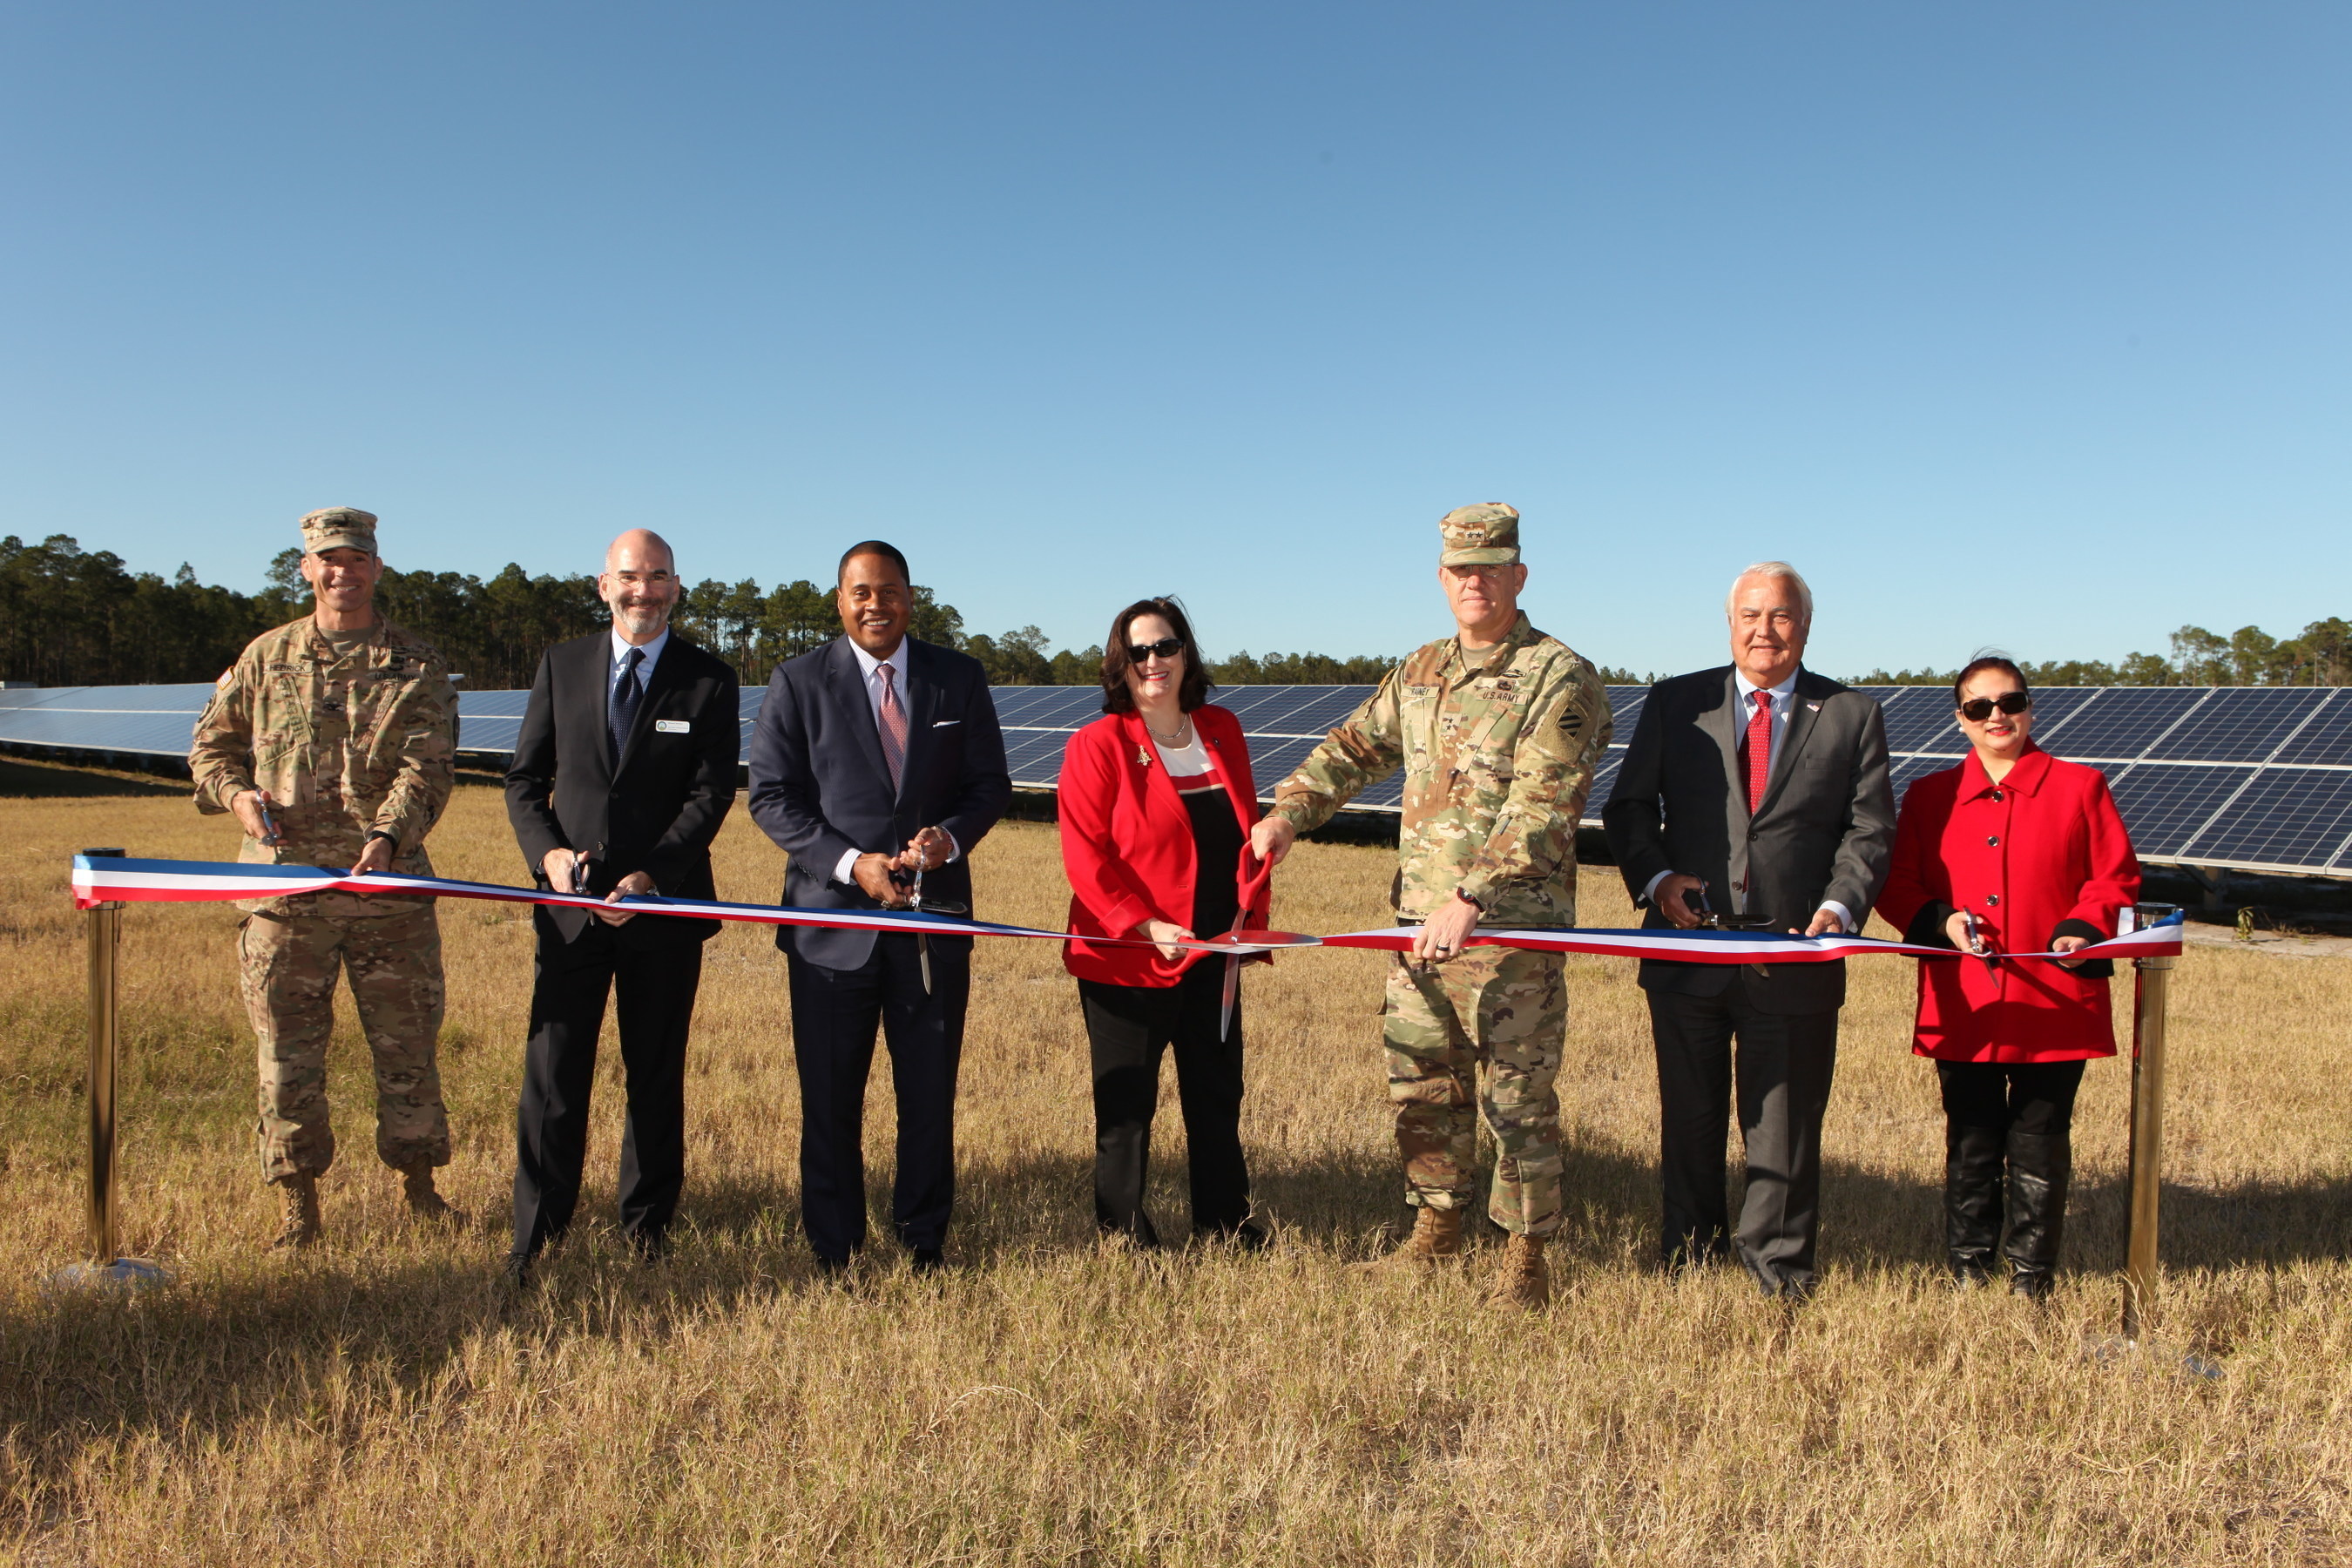 Leaders from Georgia Power and the U.S. Army joined elected officials, community leaders and other dignitaries at Fort Stewart near Hinesville, Ga. today to dedicate a new 30 megawatt (MW) on-base solar facility.